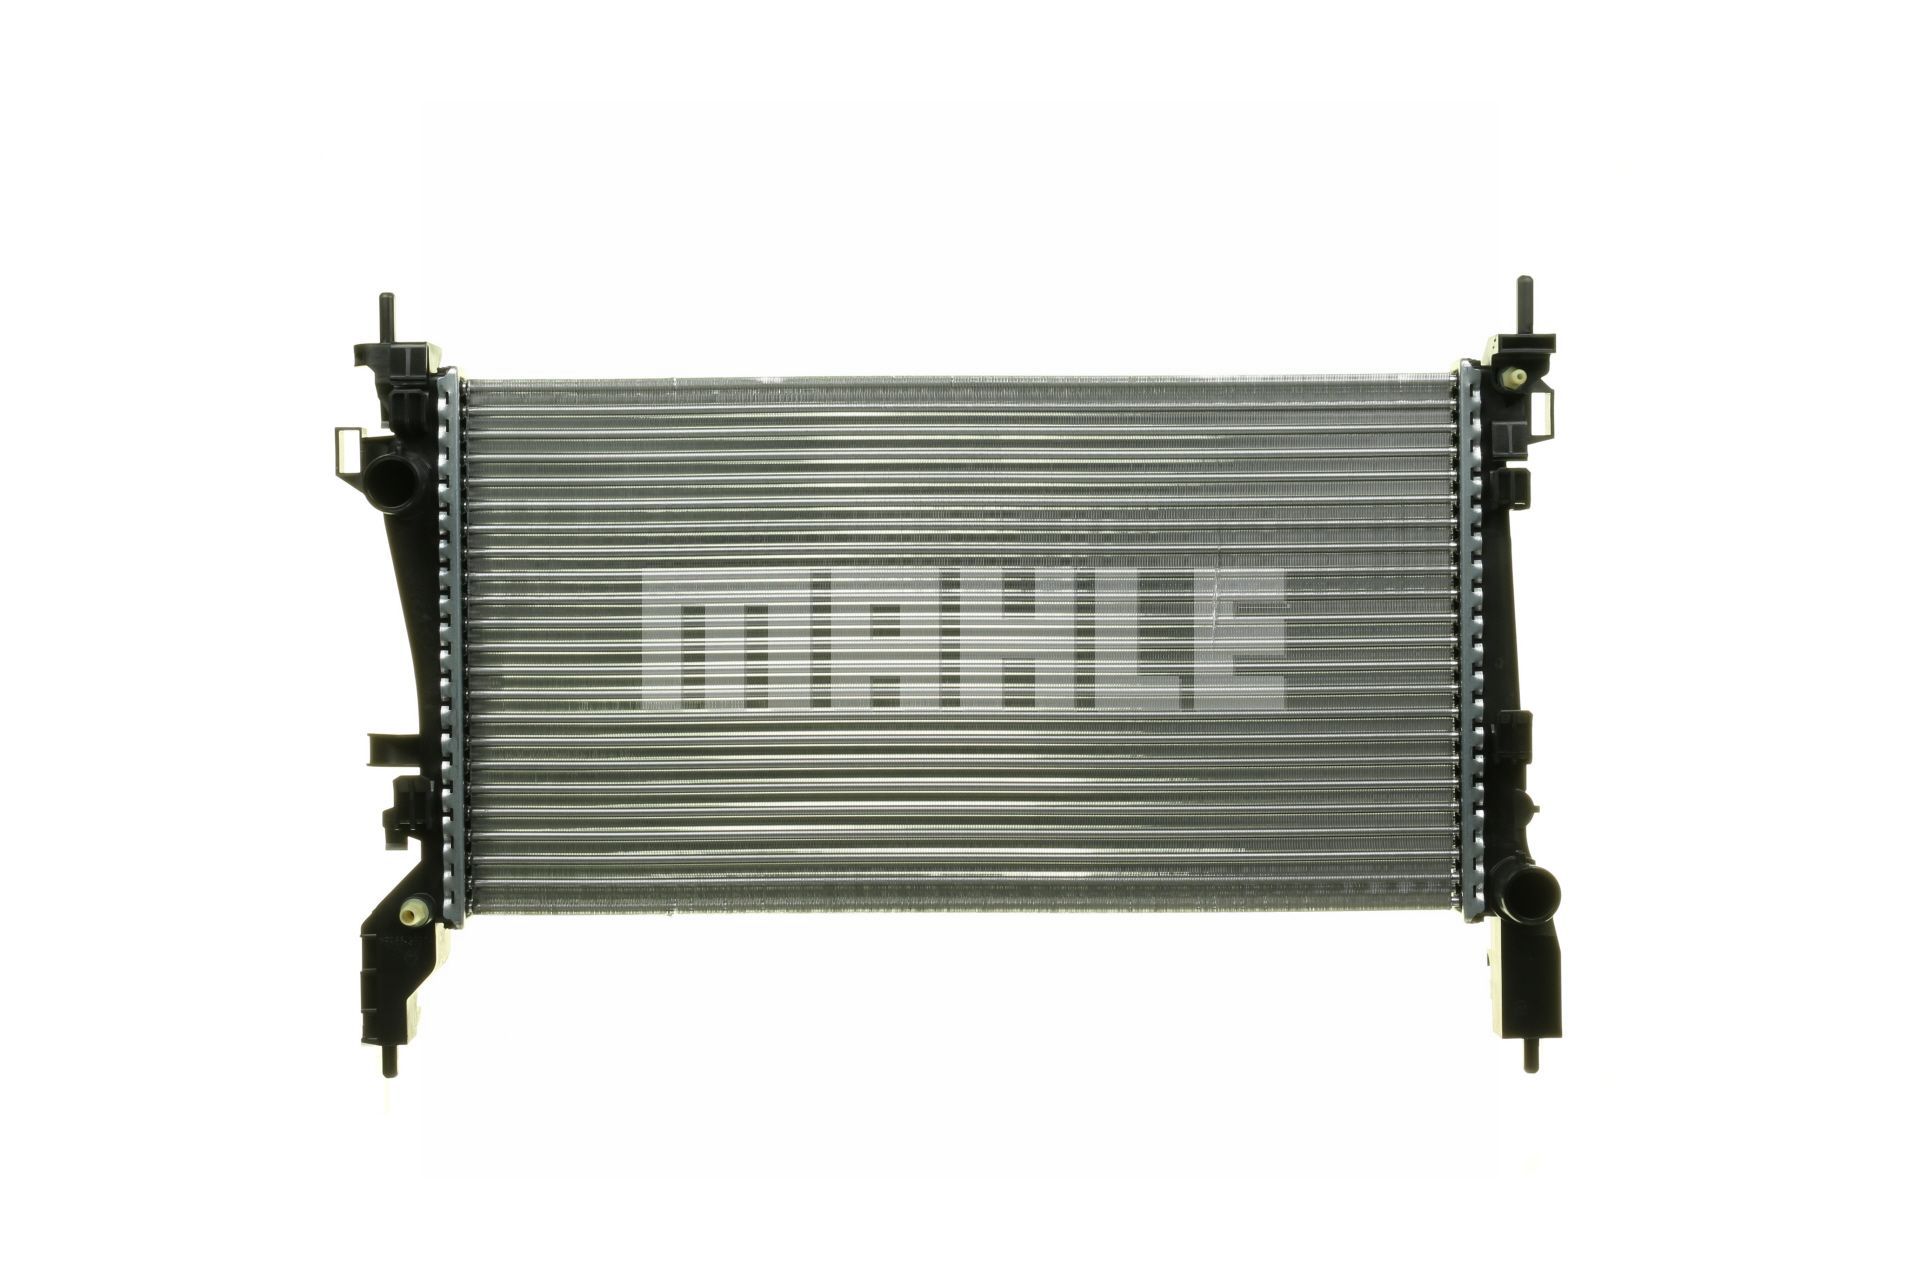 MAHLE ORIGINAL CR 1130 000P Engine radiator for vehicles without air conditioning, 630 x 340 x 26 mm, Manual Transmission, Mechanically jointed cooling fins